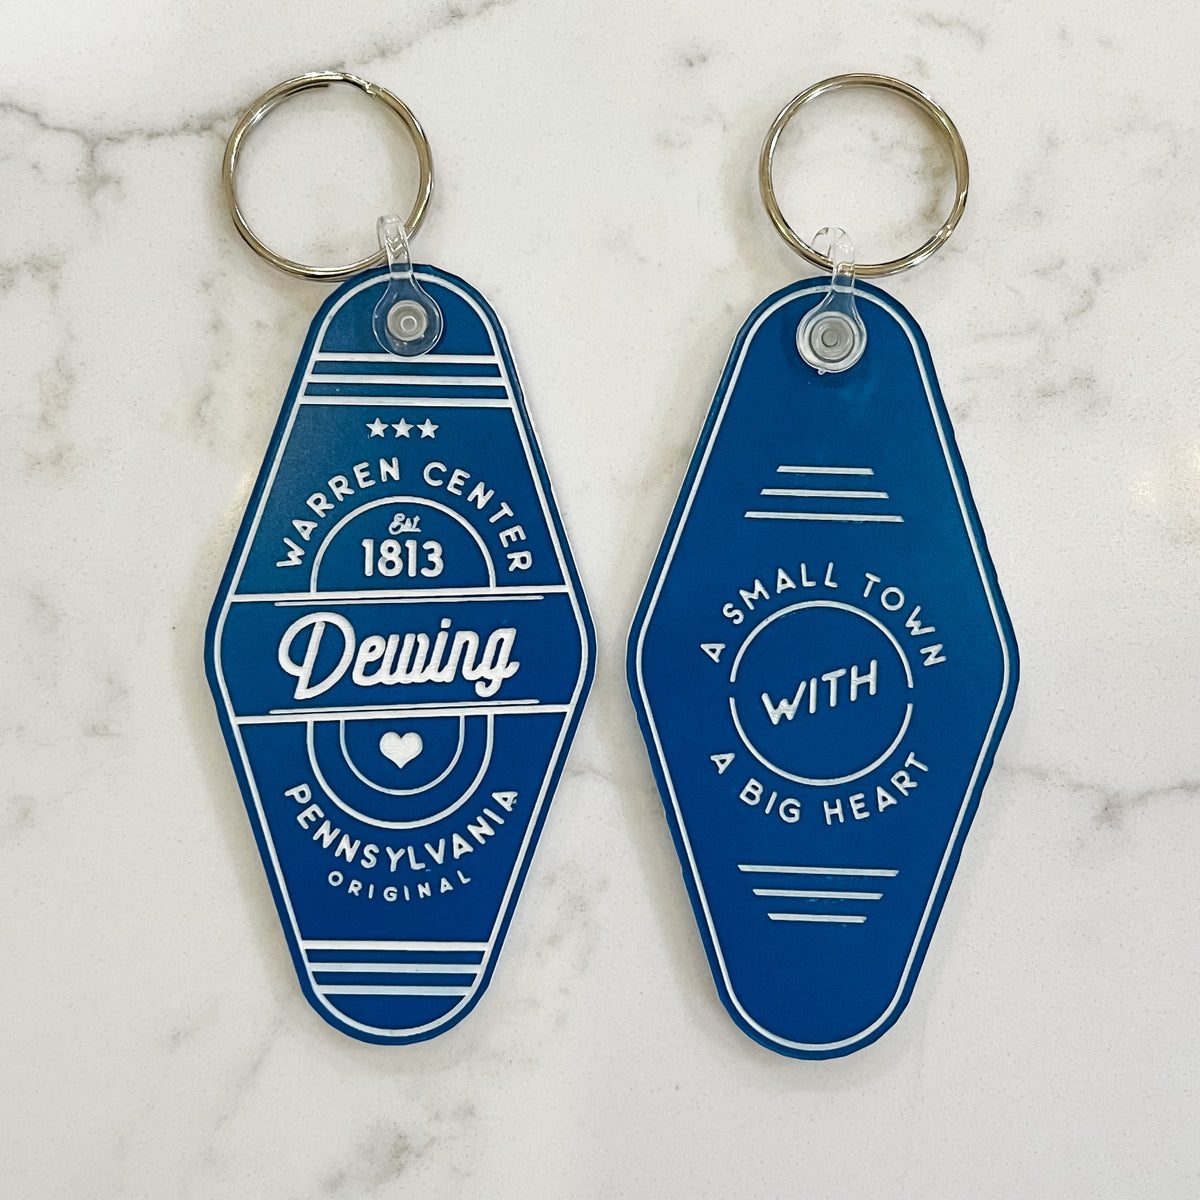 Warren Center - A Small Town with a Big Heart | Retro Motel Keychain